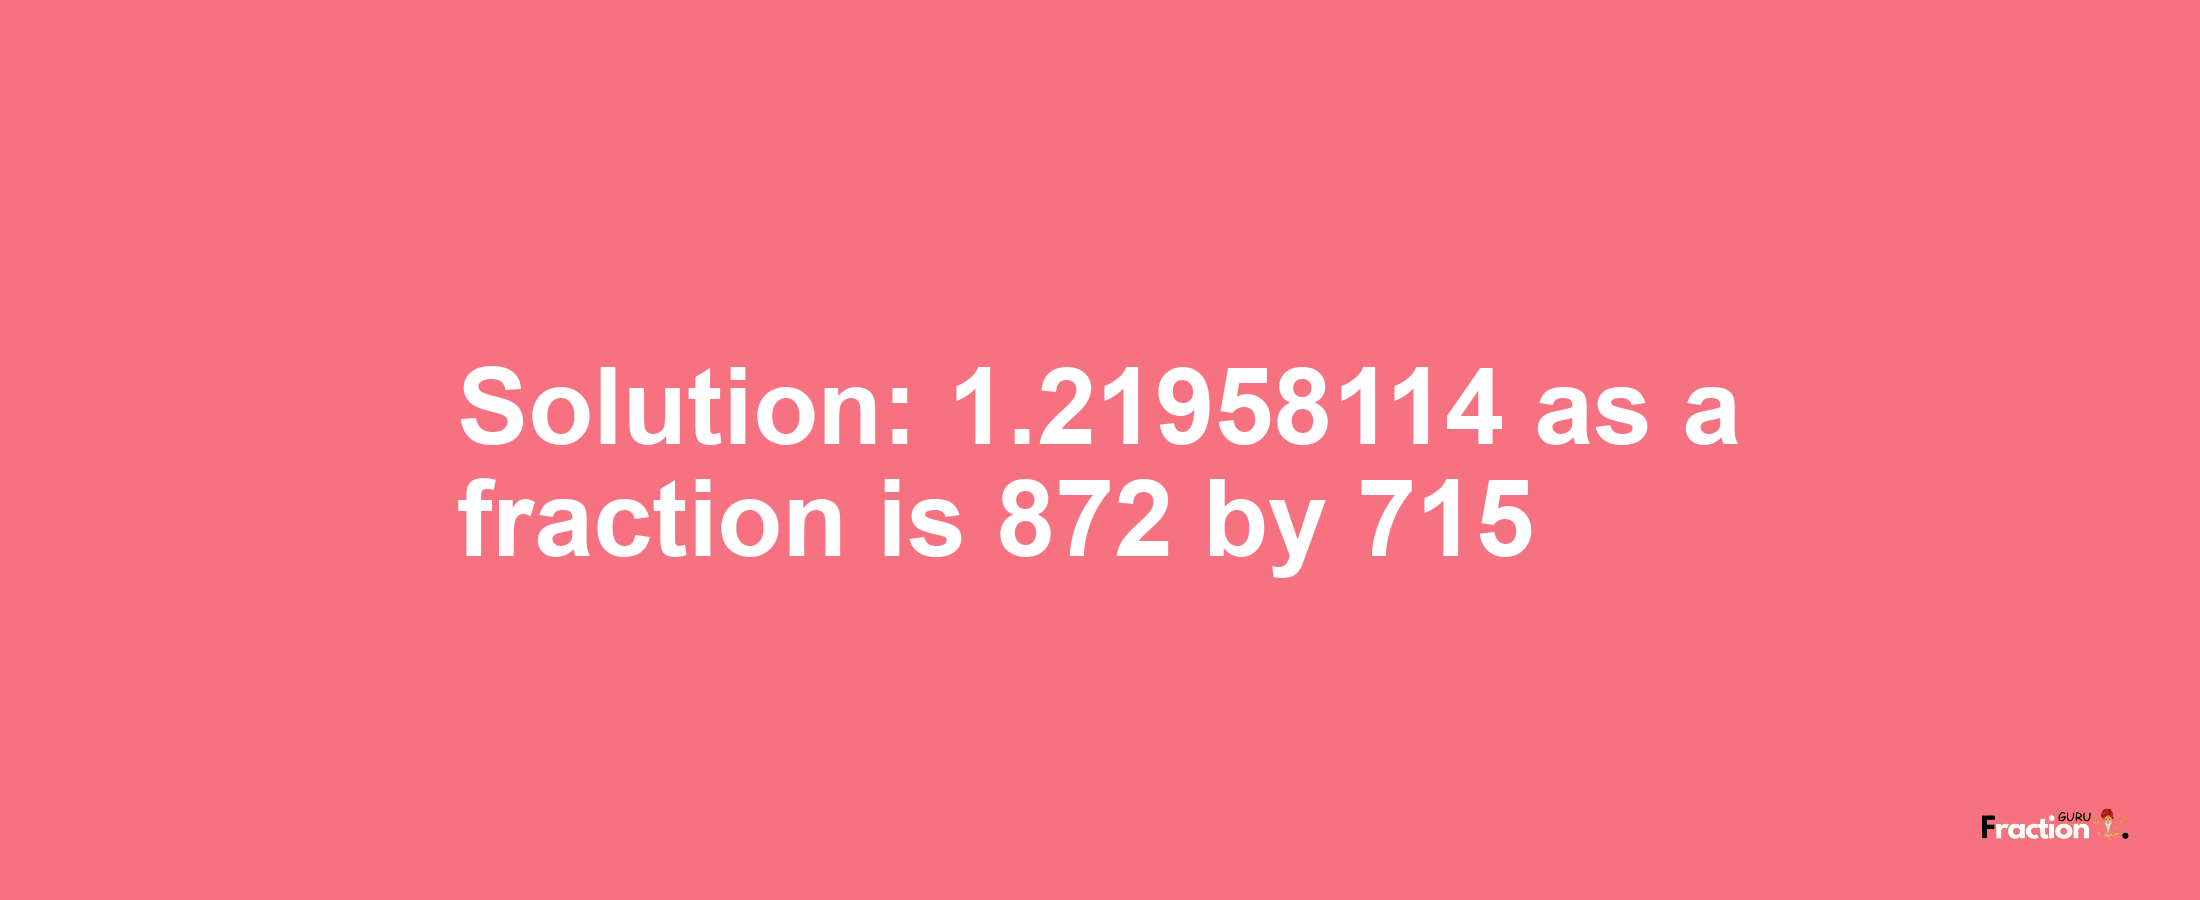 Solution:1.21958114 as a fraction is 872/715